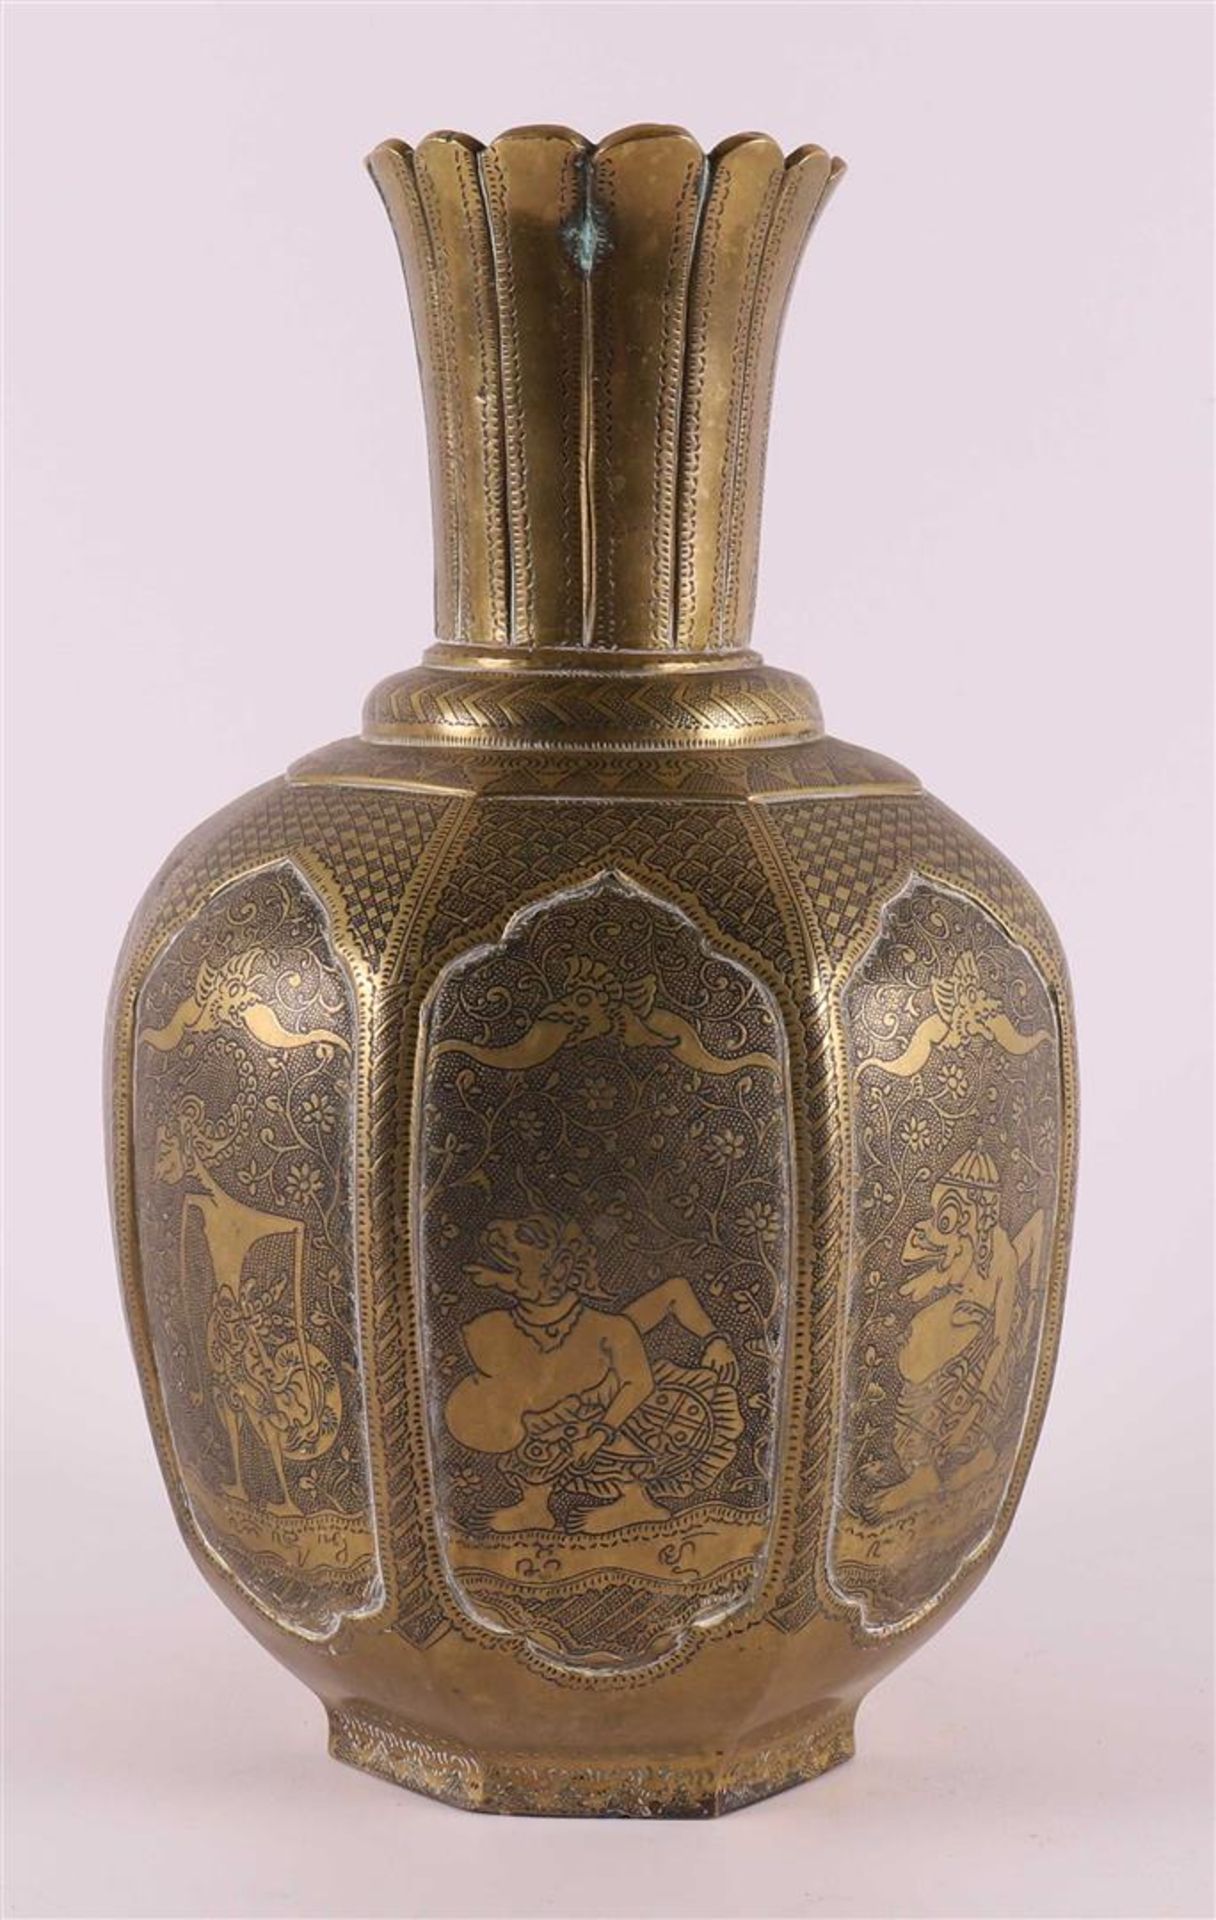 A brass baluster-shaped vase, India, 1st half of the 20th century. - Image 3 of 4